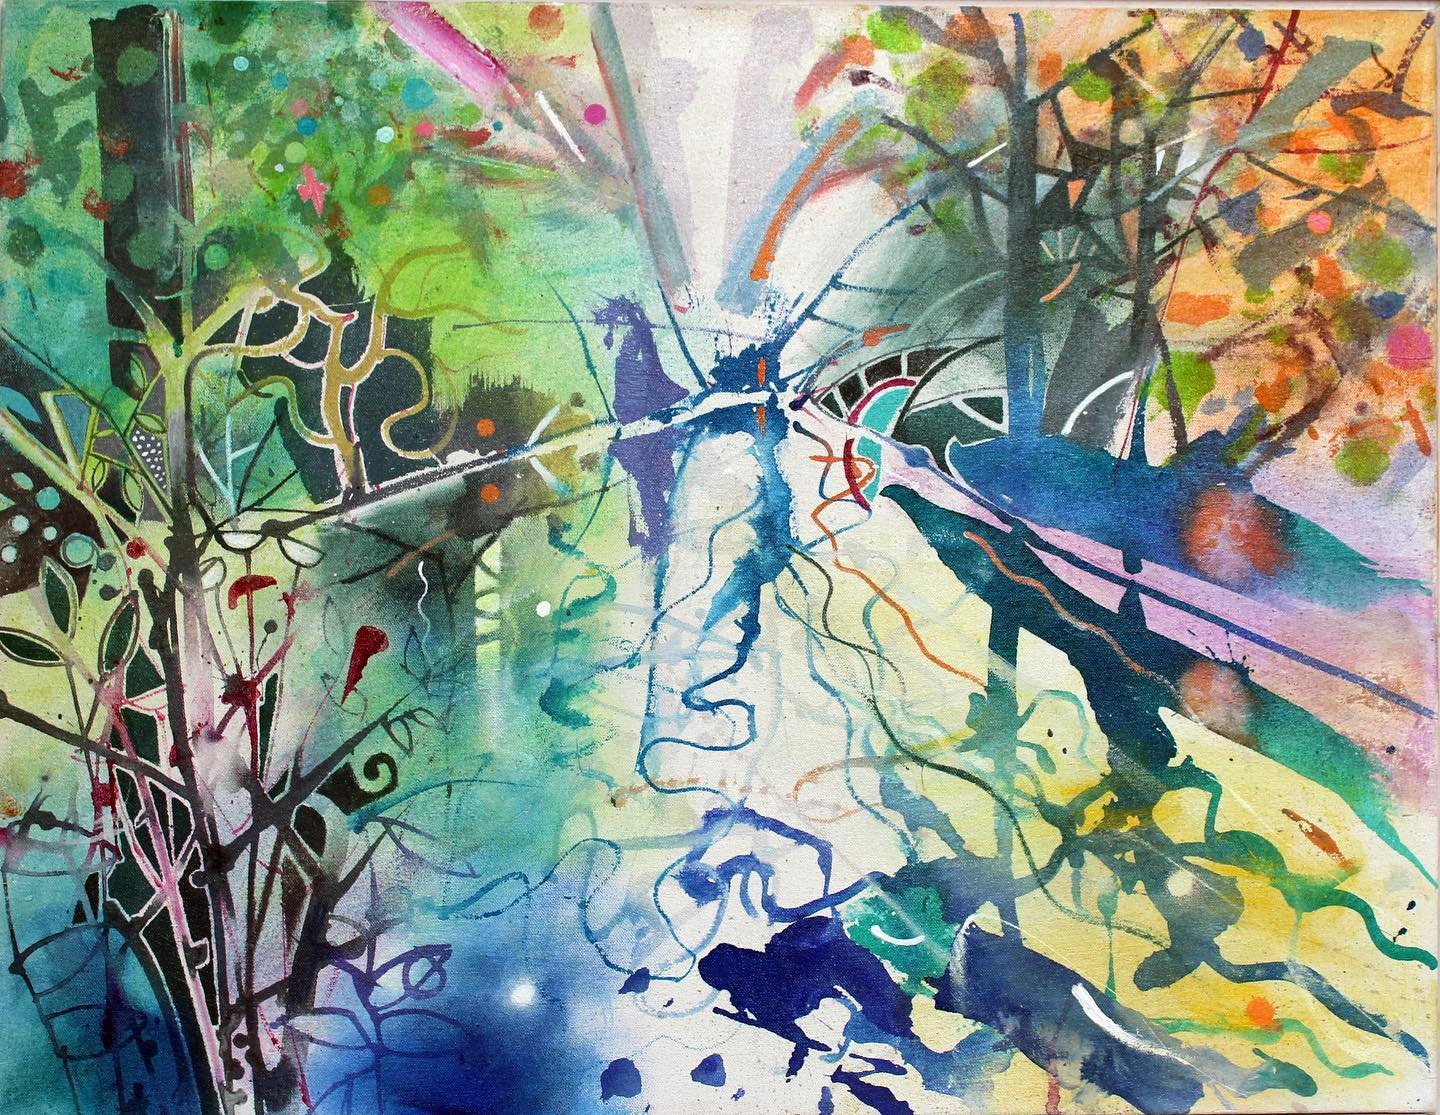 The Arborealists: At the Water&rsquo;s Edge

3 - 14 November 2023
10 - 5pm Tues to Sun

Private View 2 - 5pm Sat 4 Nov

Pie Factory 5 Broad Street Margate CT9 1EW
07908 444337 or 07711 783316

At the Water&rsquo;s Edge brings together a contemporary 